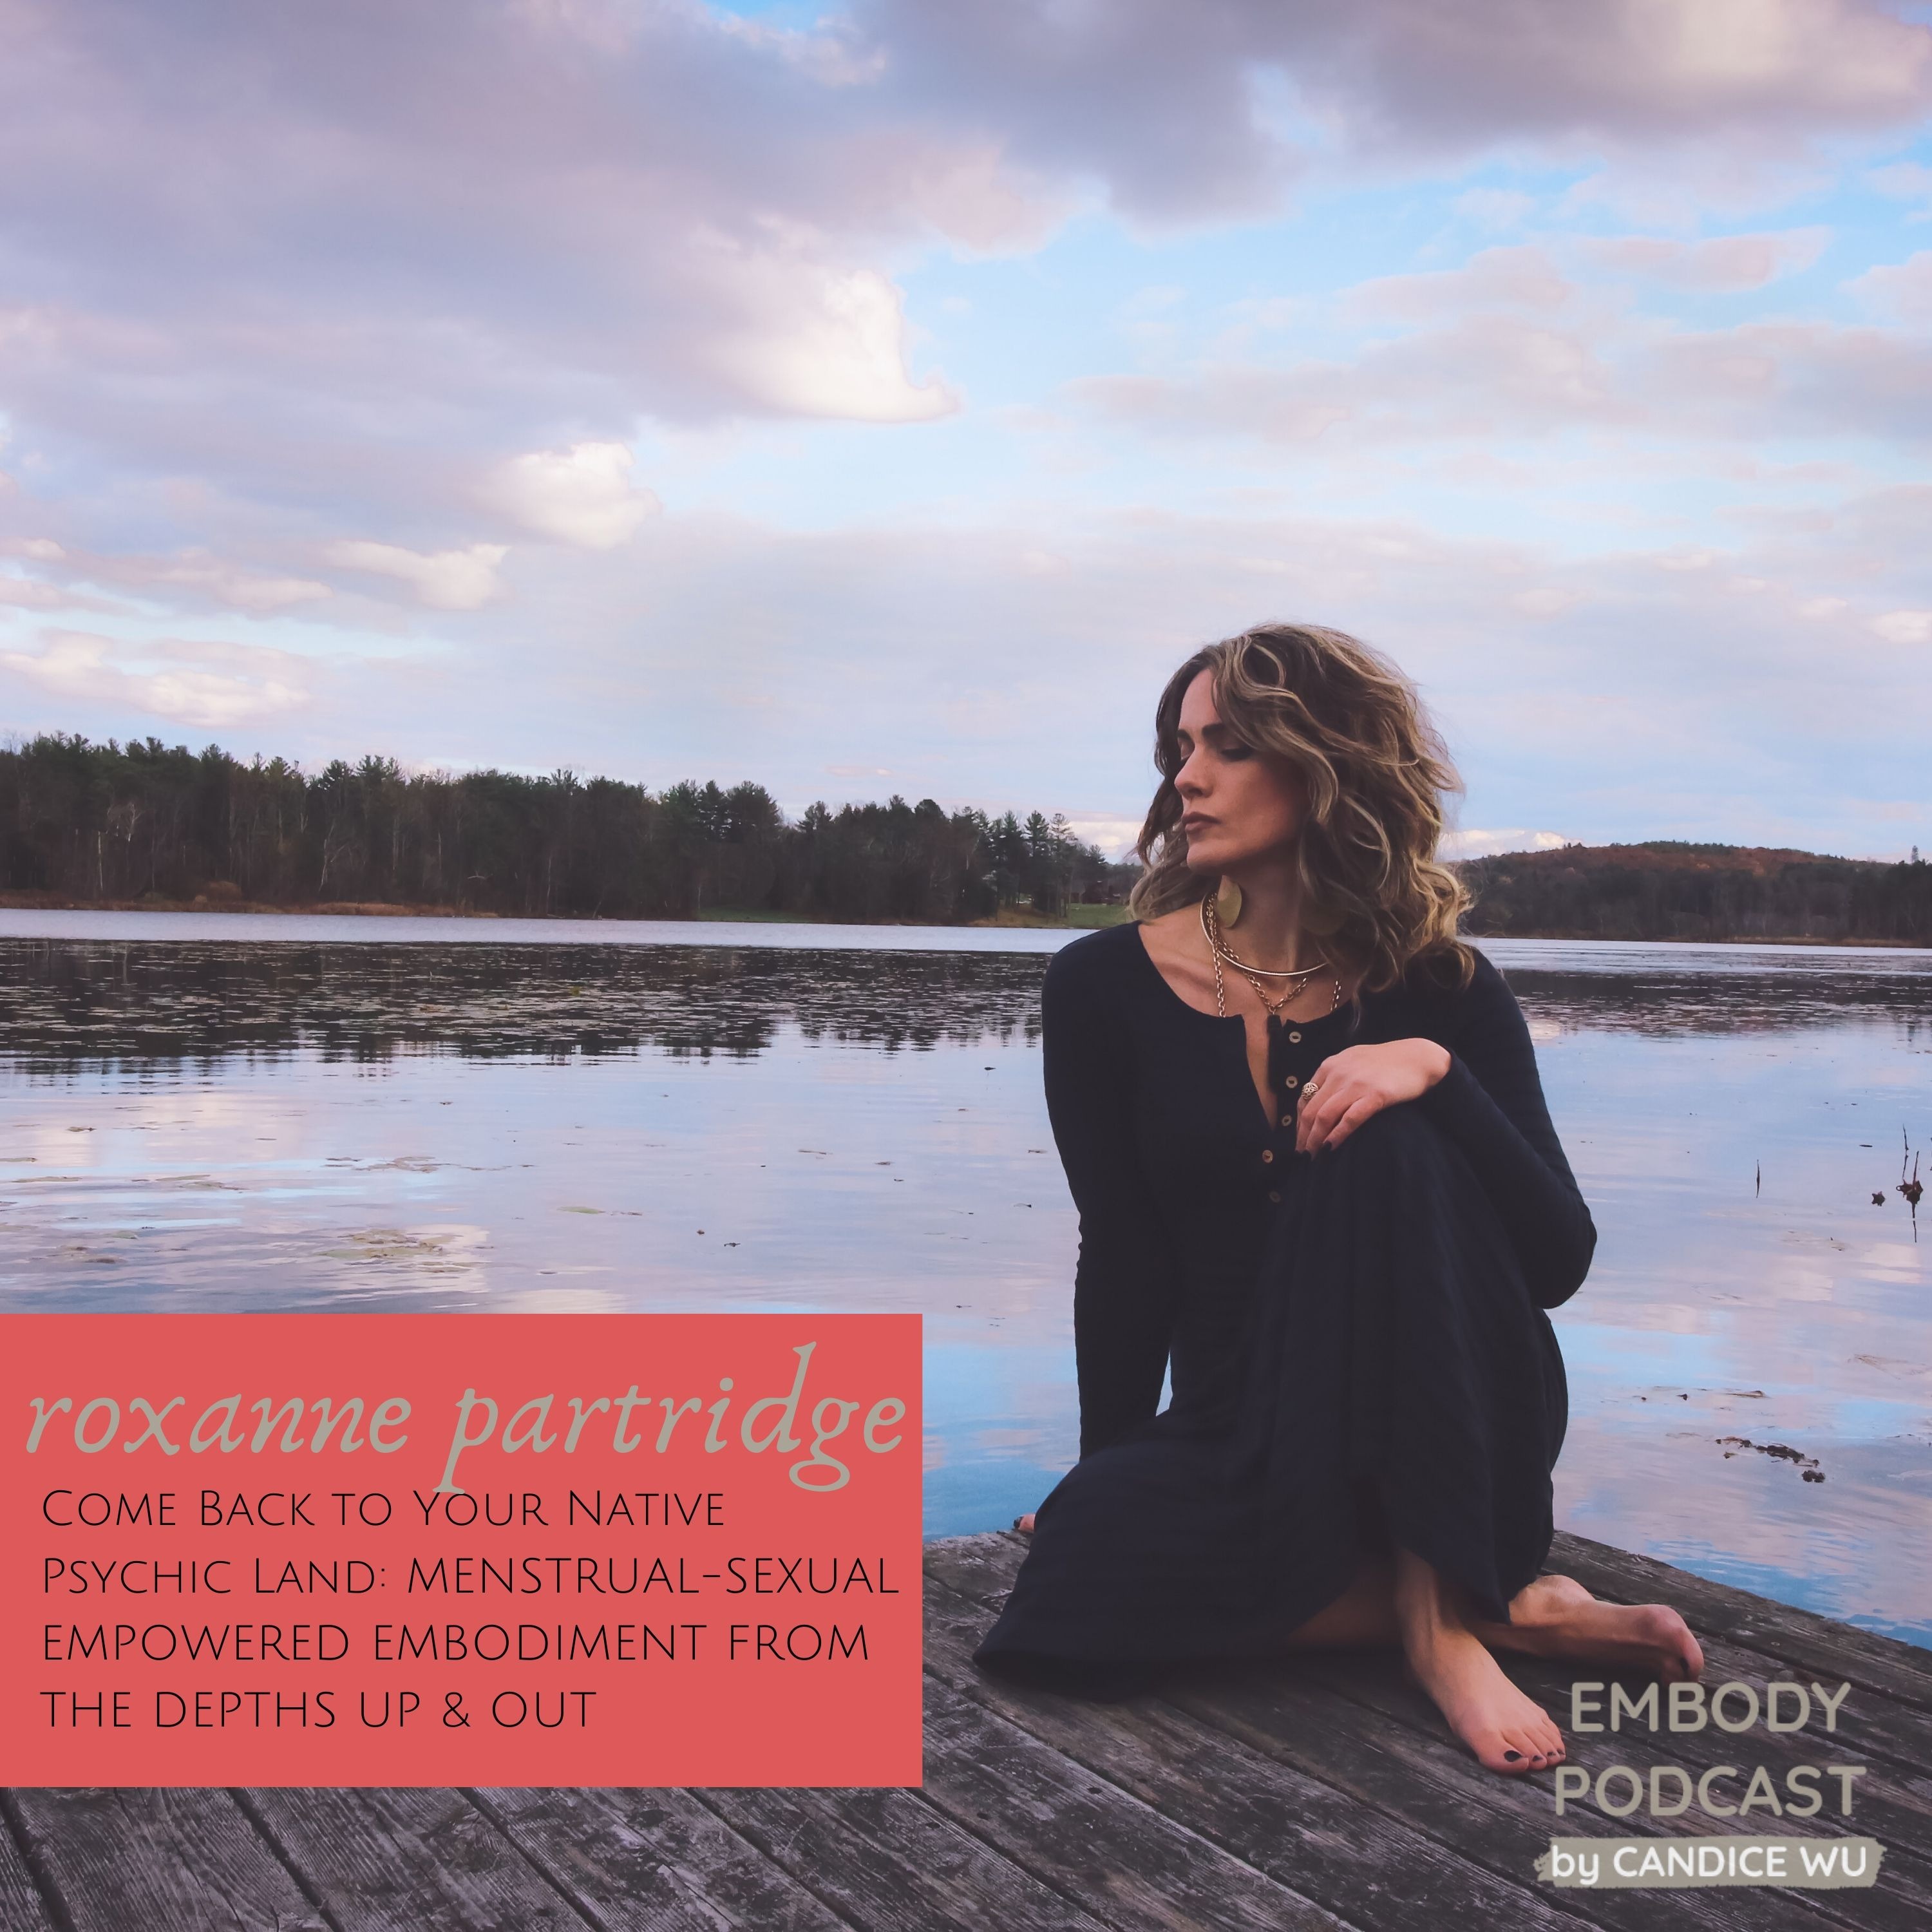 100: Roxanne Partridge: Come Back to Your Native Psychic Land – Menstrual-Sexual Empowered Embodiment From the Depths Up & Out